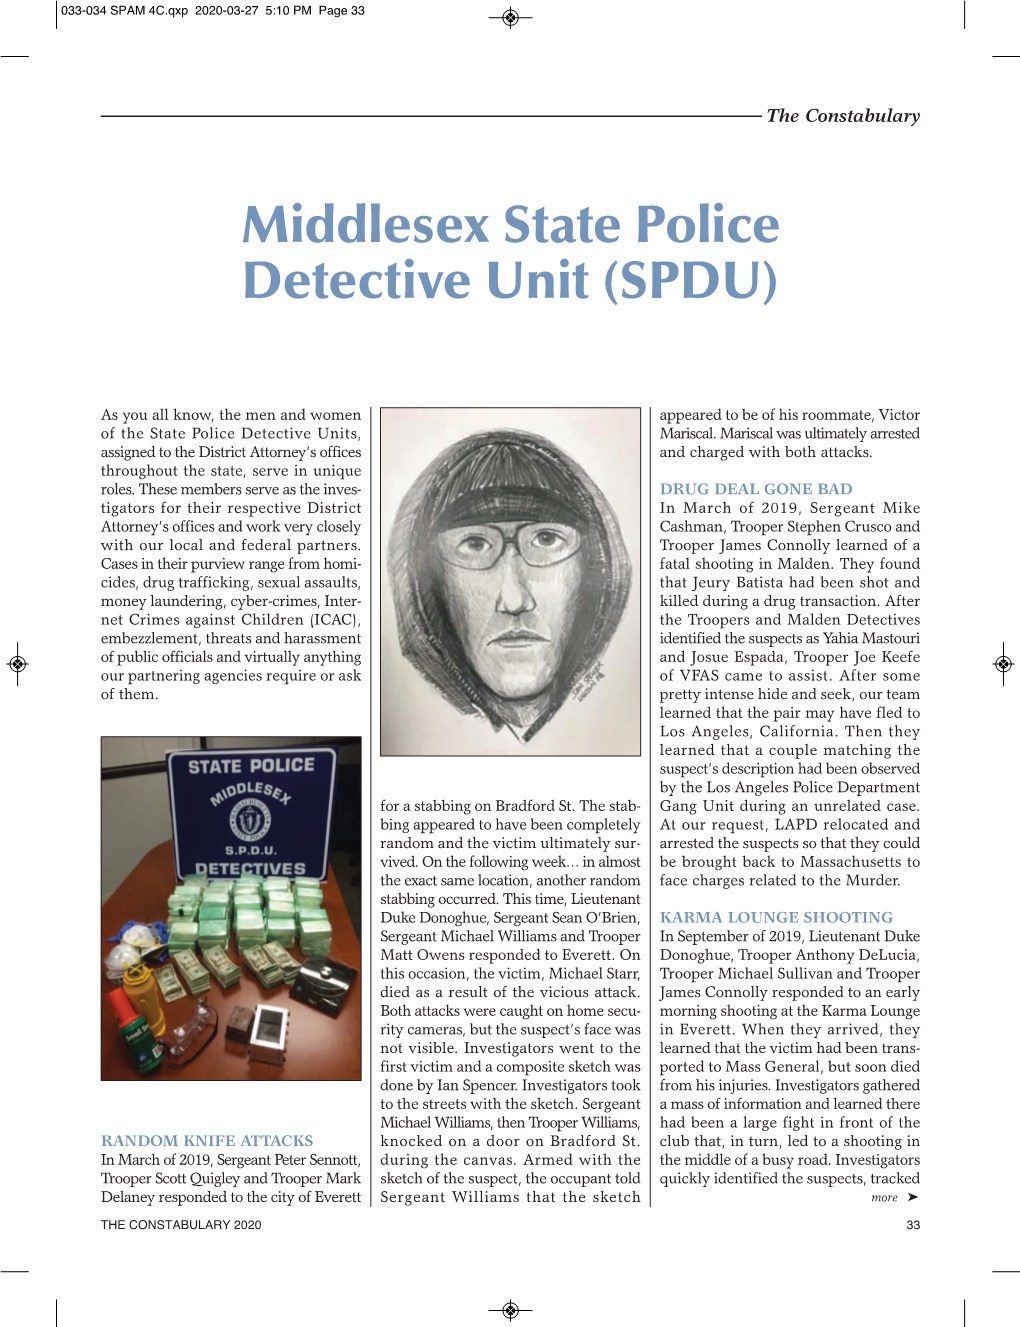 Middlesex State Police Detective Unit (SPDU)